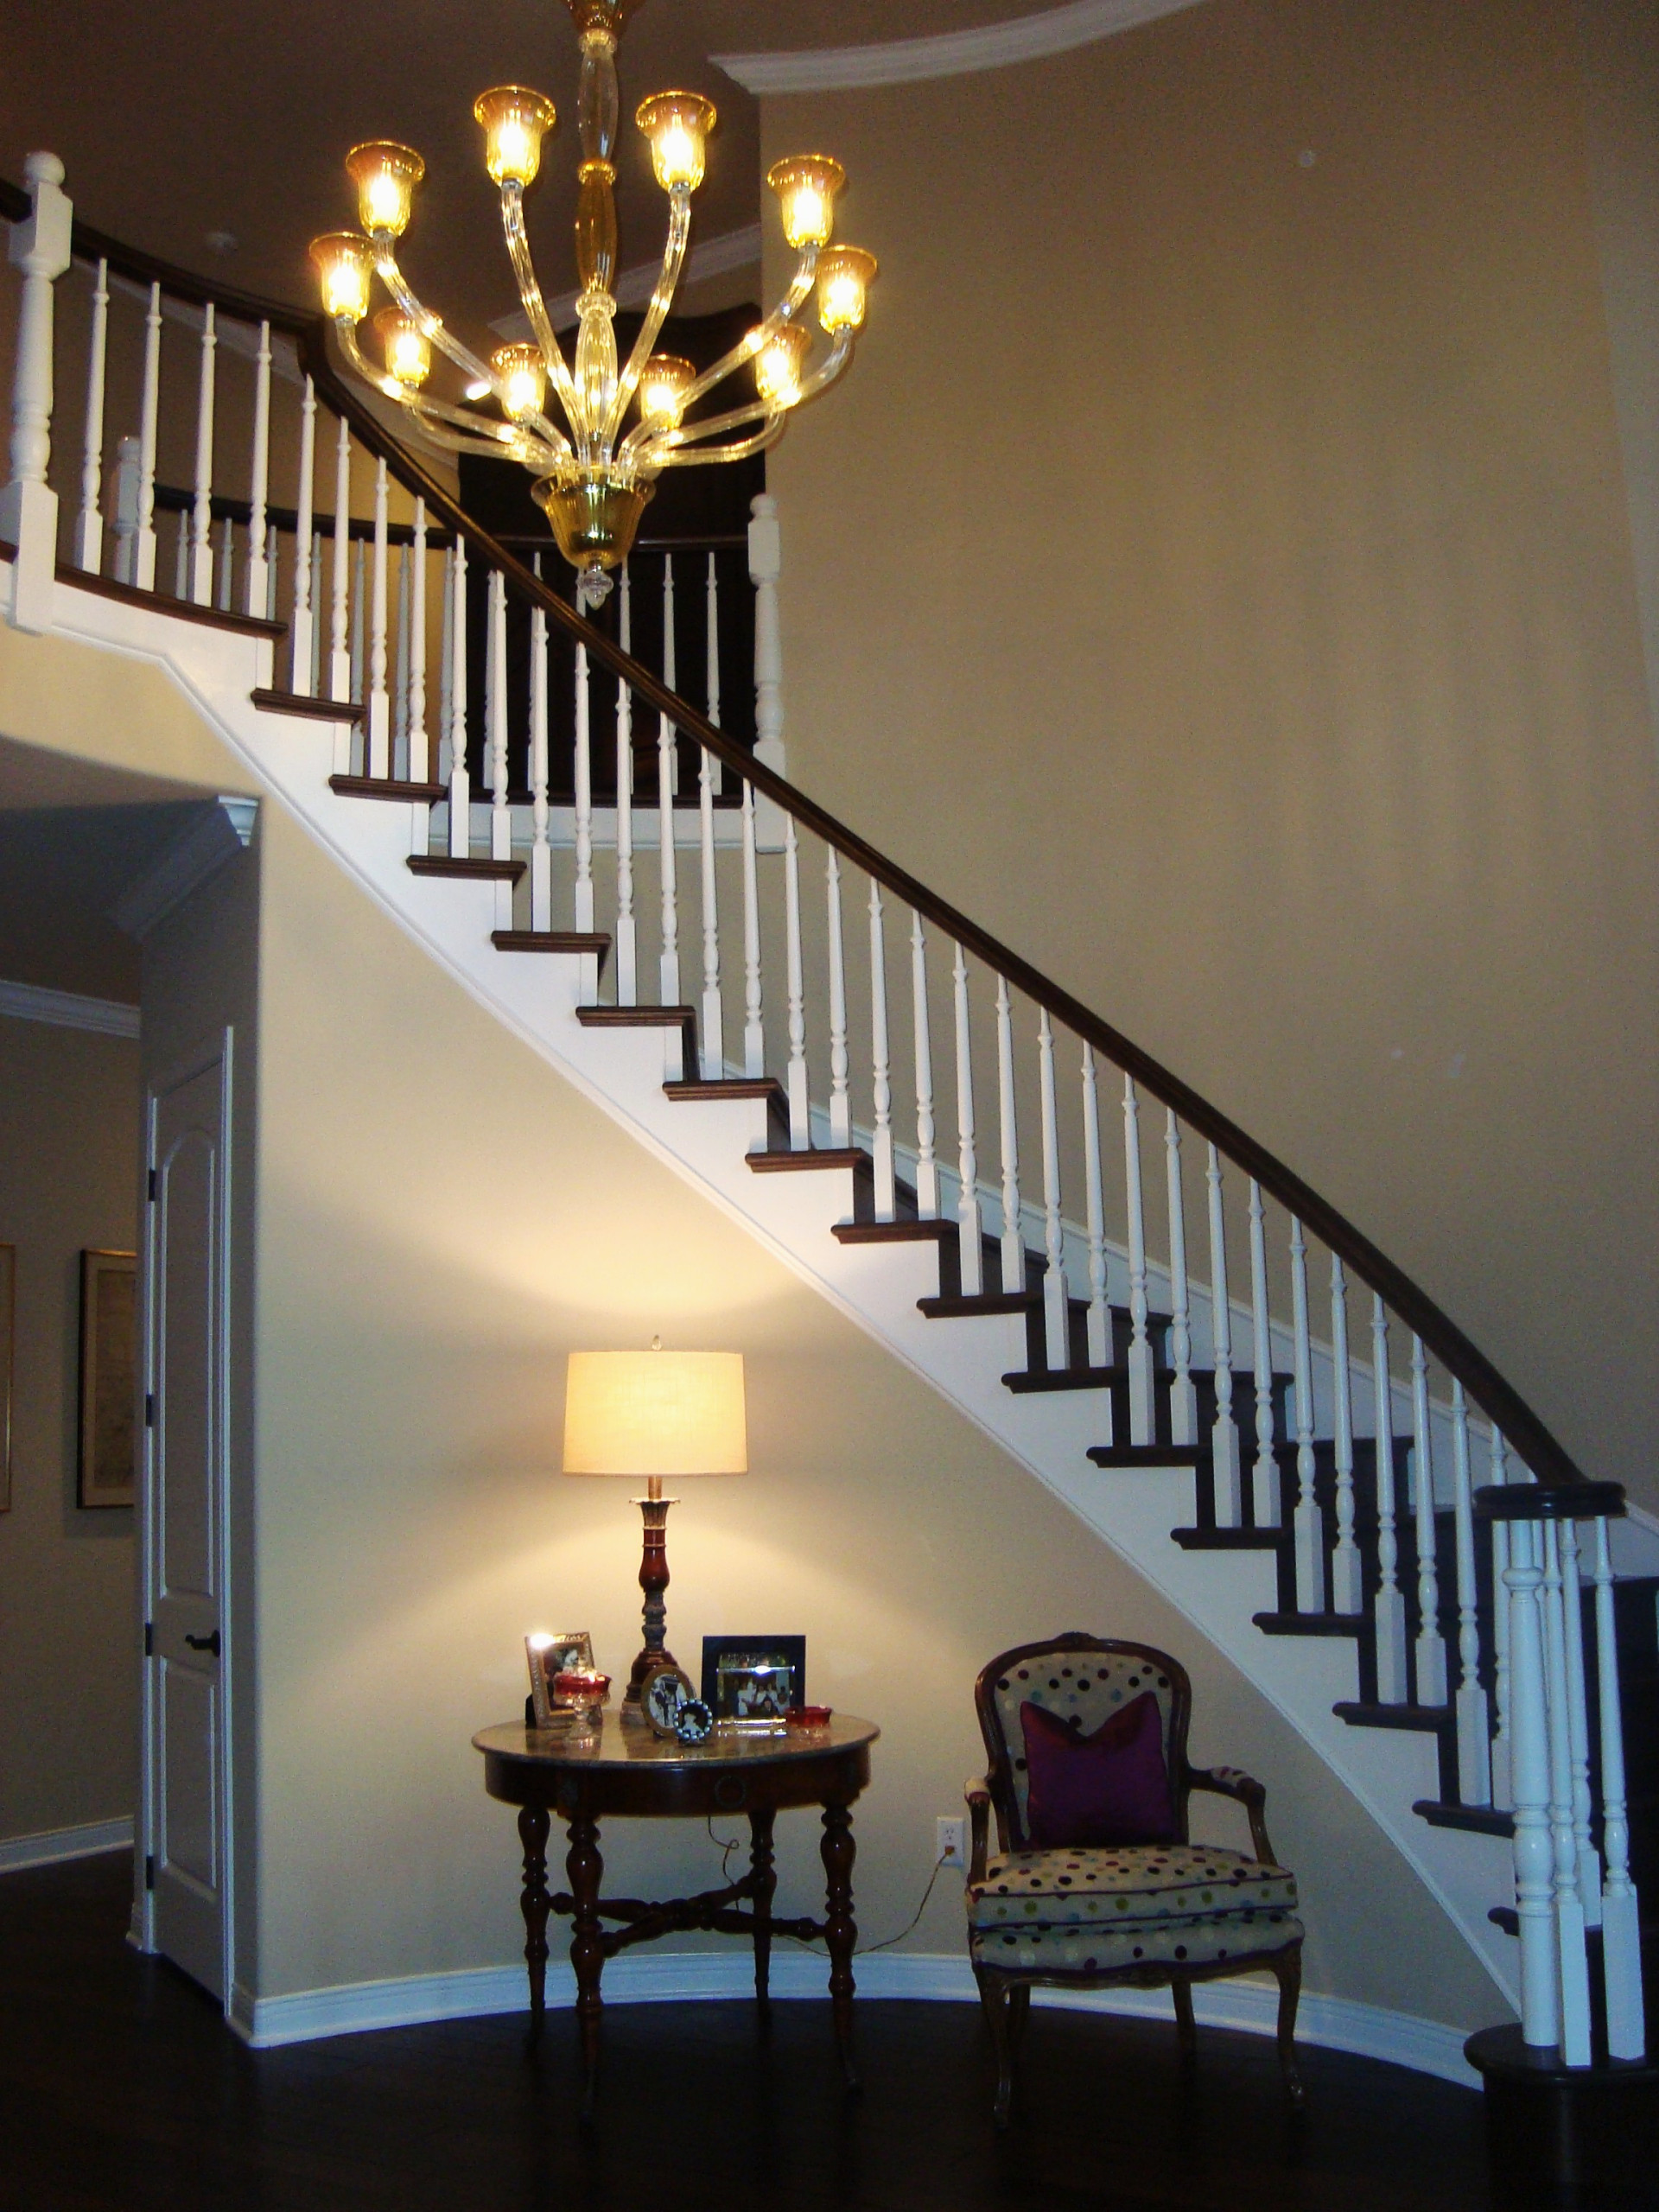 The NEW Nolan Entry Staircase with Venetian Glass Chandelier